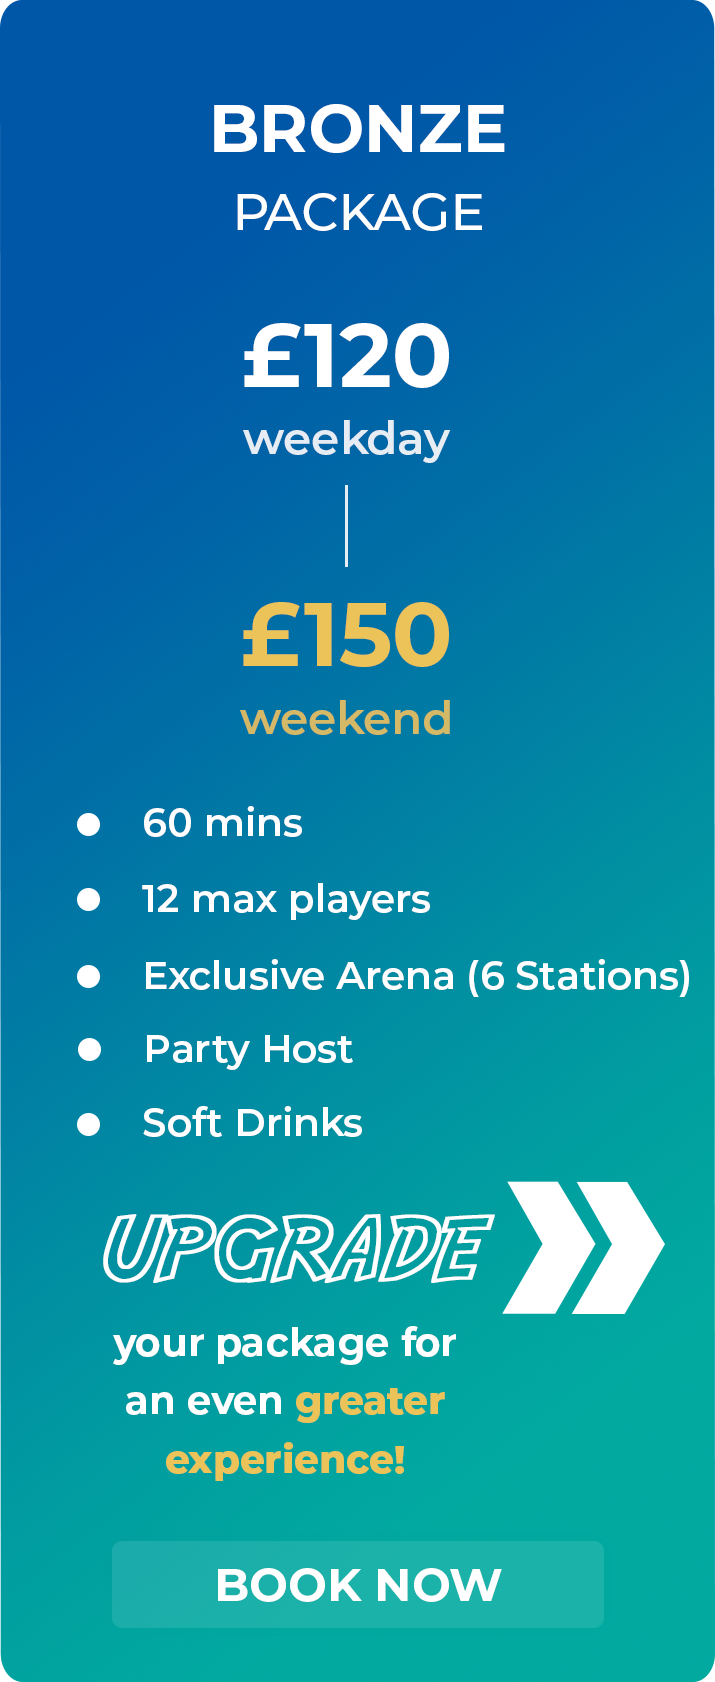 VR City Bradford virtual reality venue party packages. Birthday ideas, Things to do in groups in bradford, Activities to do for Eid, Gaming for boys,Things to do near me, VR experience.